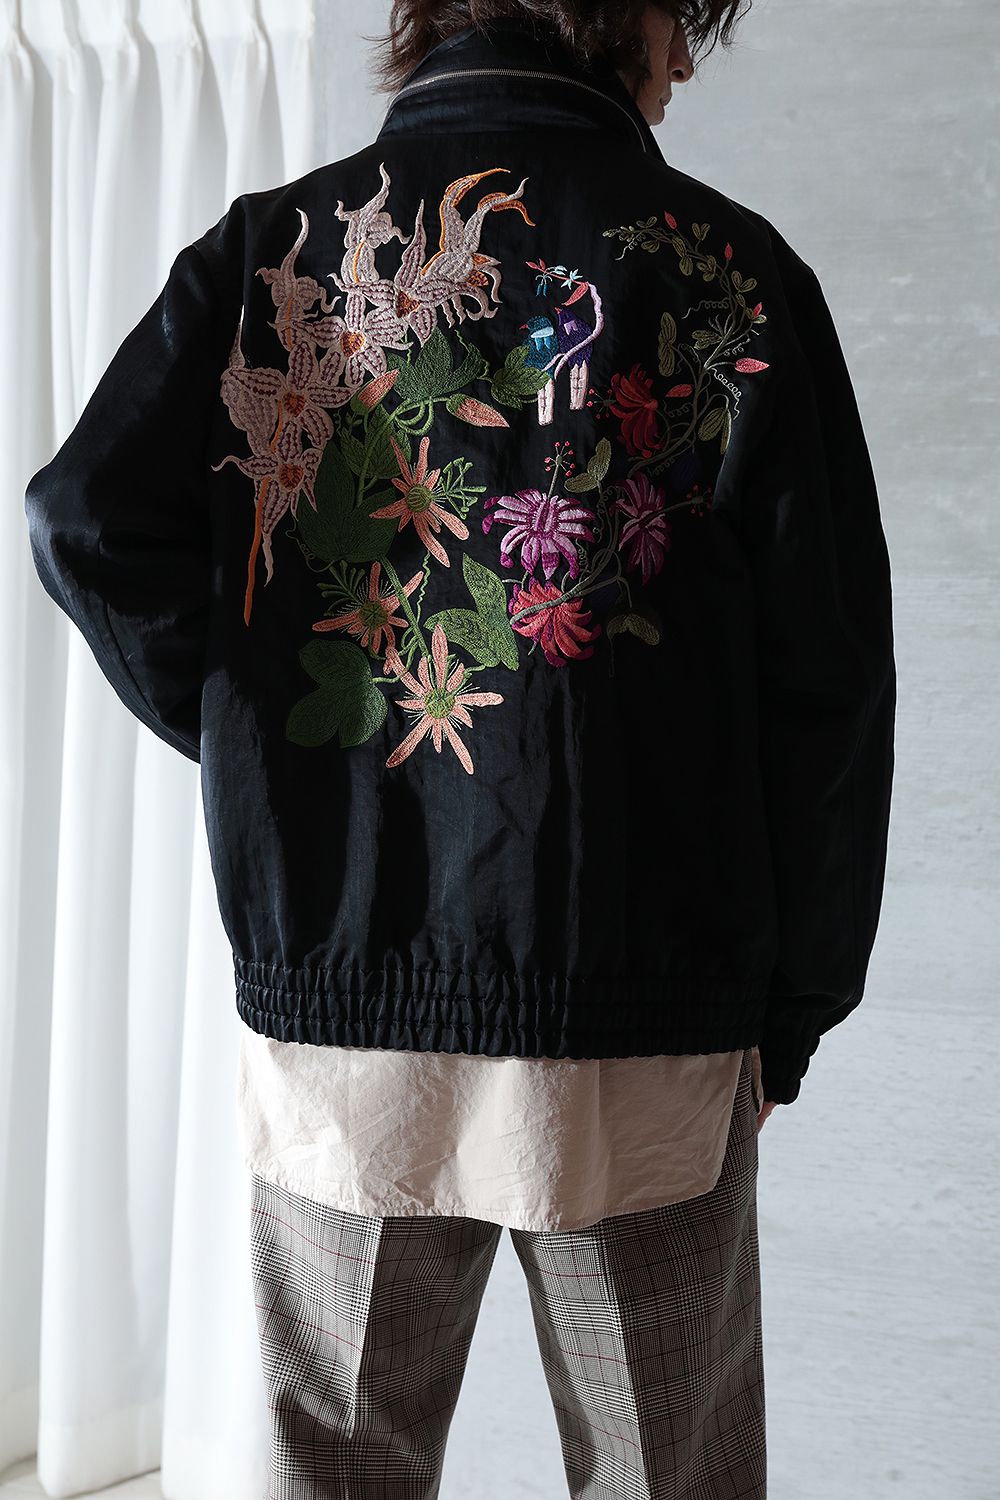 【DRIES VAN NOTEN / ドリスヴァンノッテン】23AW COLLECTION - Relation with Nature ...